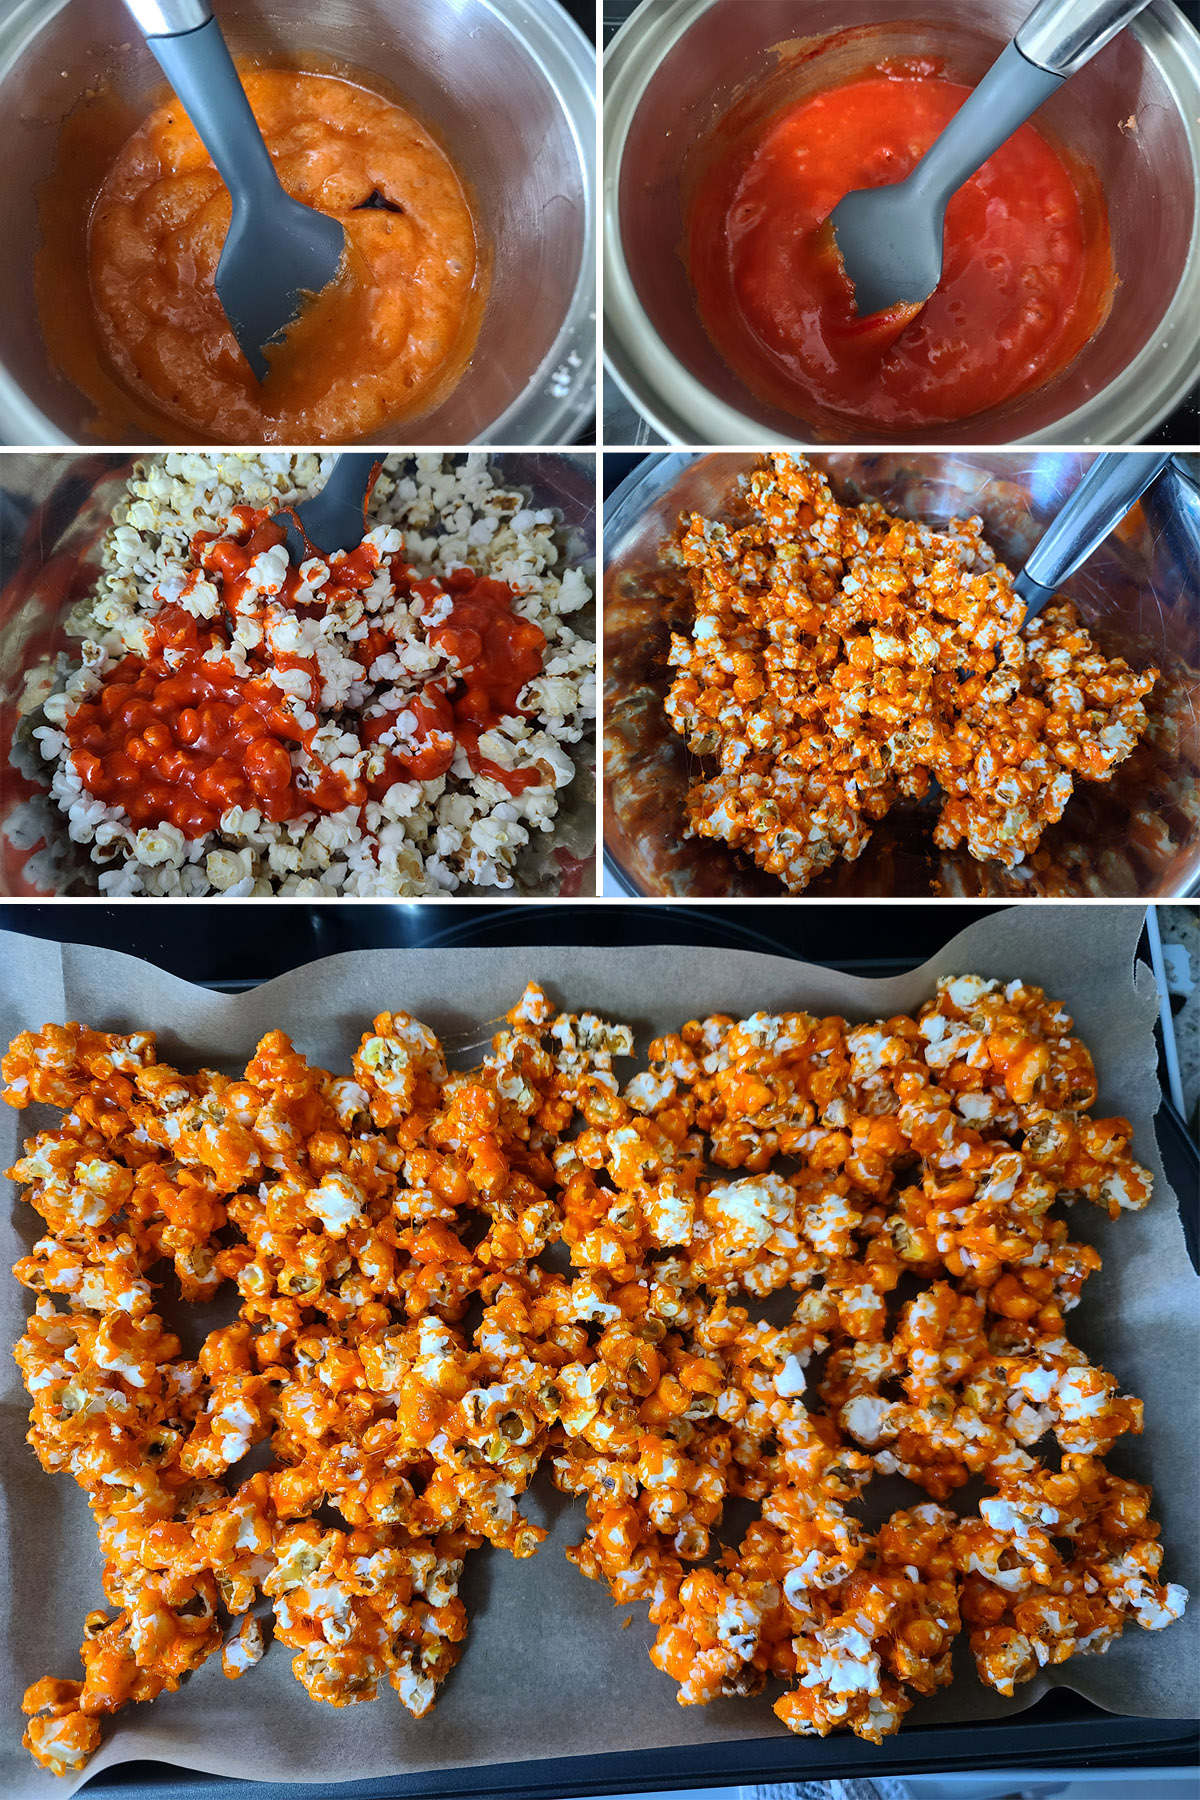 A 5 part image showing the orange glaze being dyed darker, then poured over the popcorn and mixed.